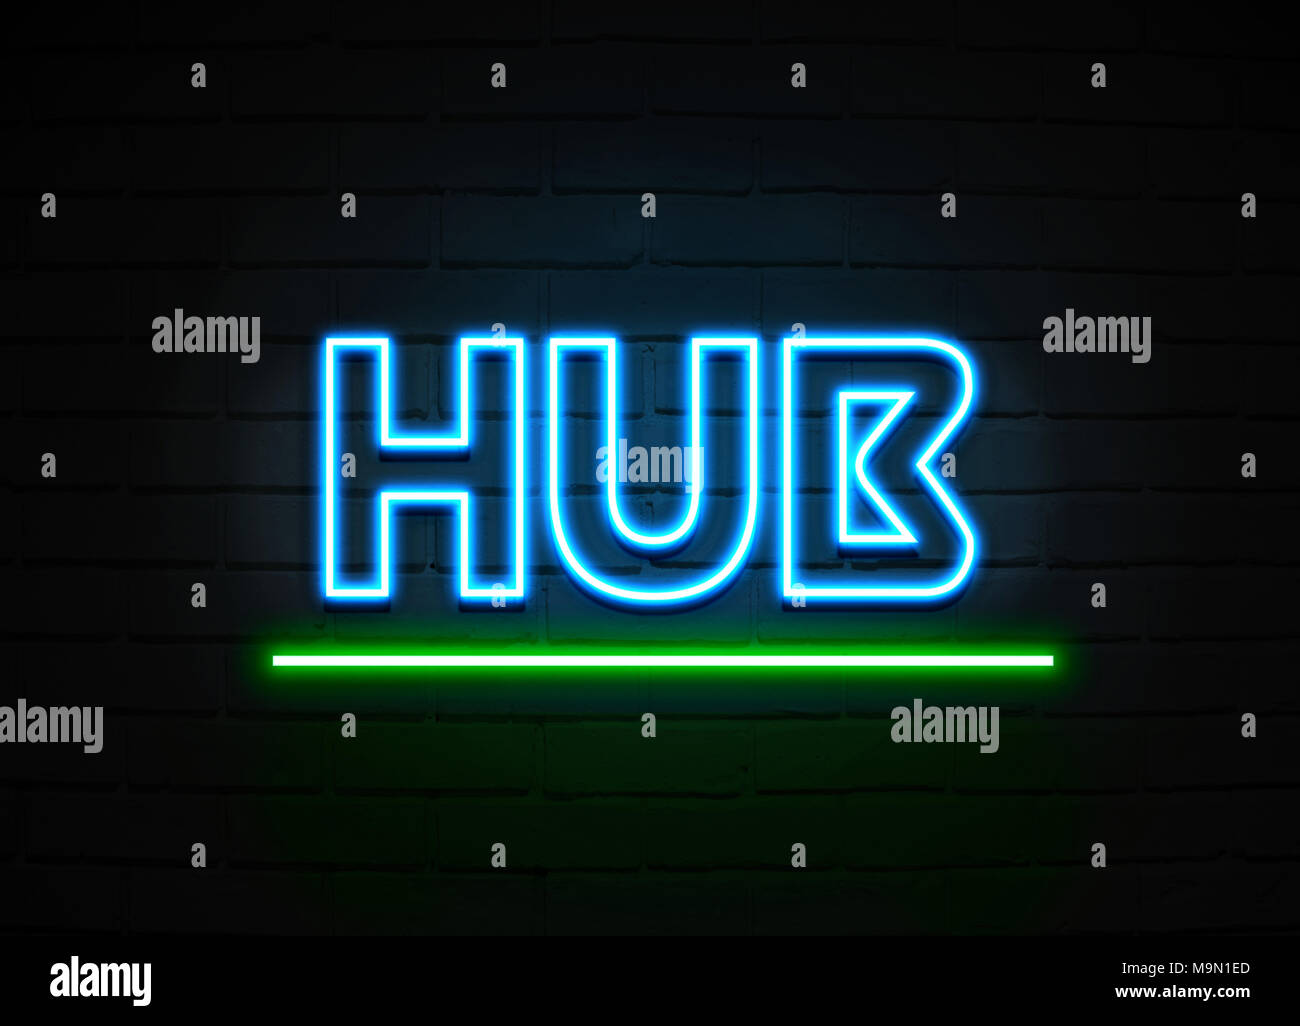 Hub neon sign - Glowing Neon Sign on brickwall wall - 3D rendered royalty free stock illustration. Stock Photo